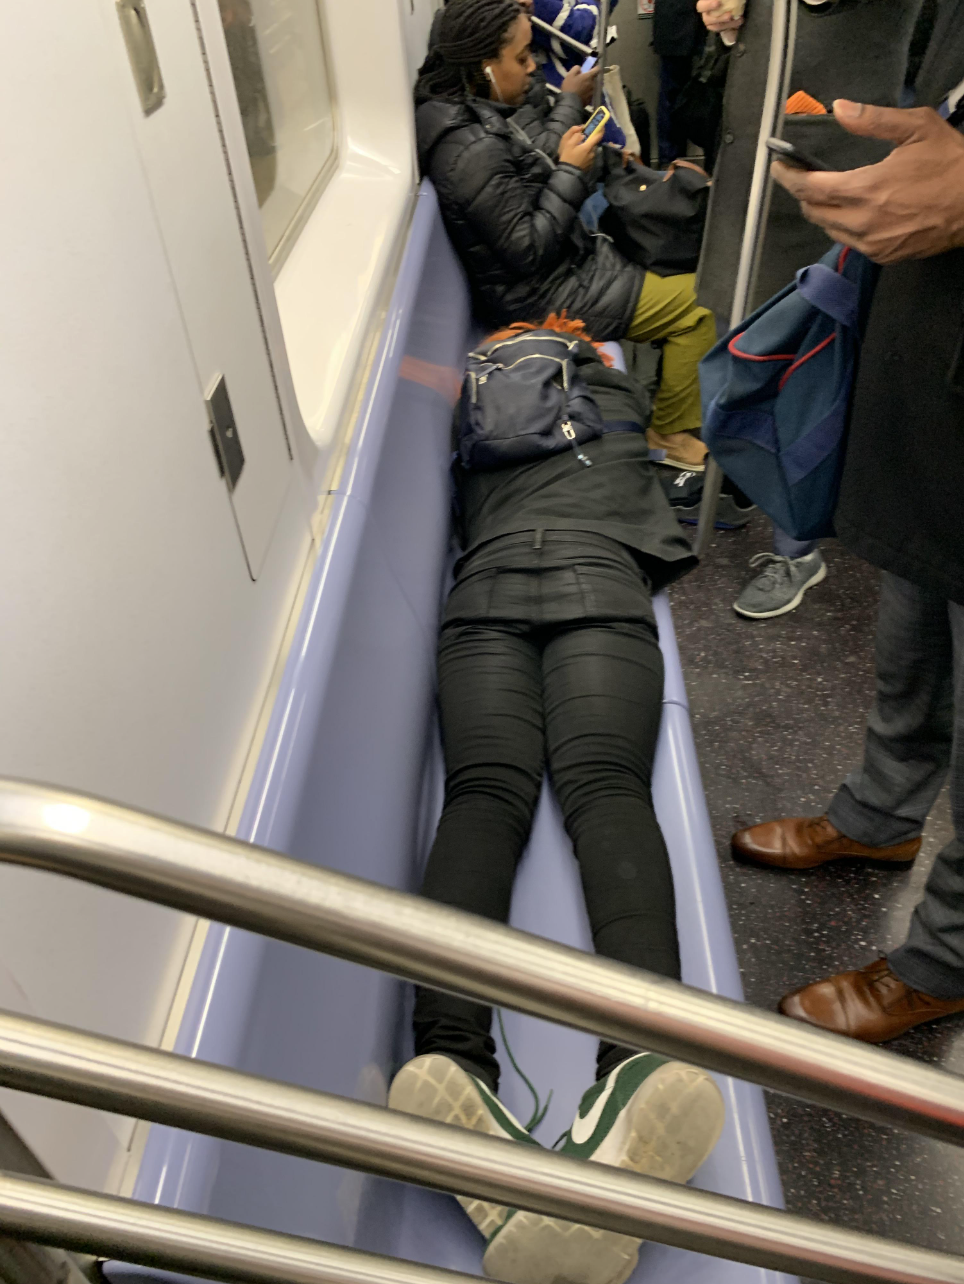 A woman laying down on the subway seat